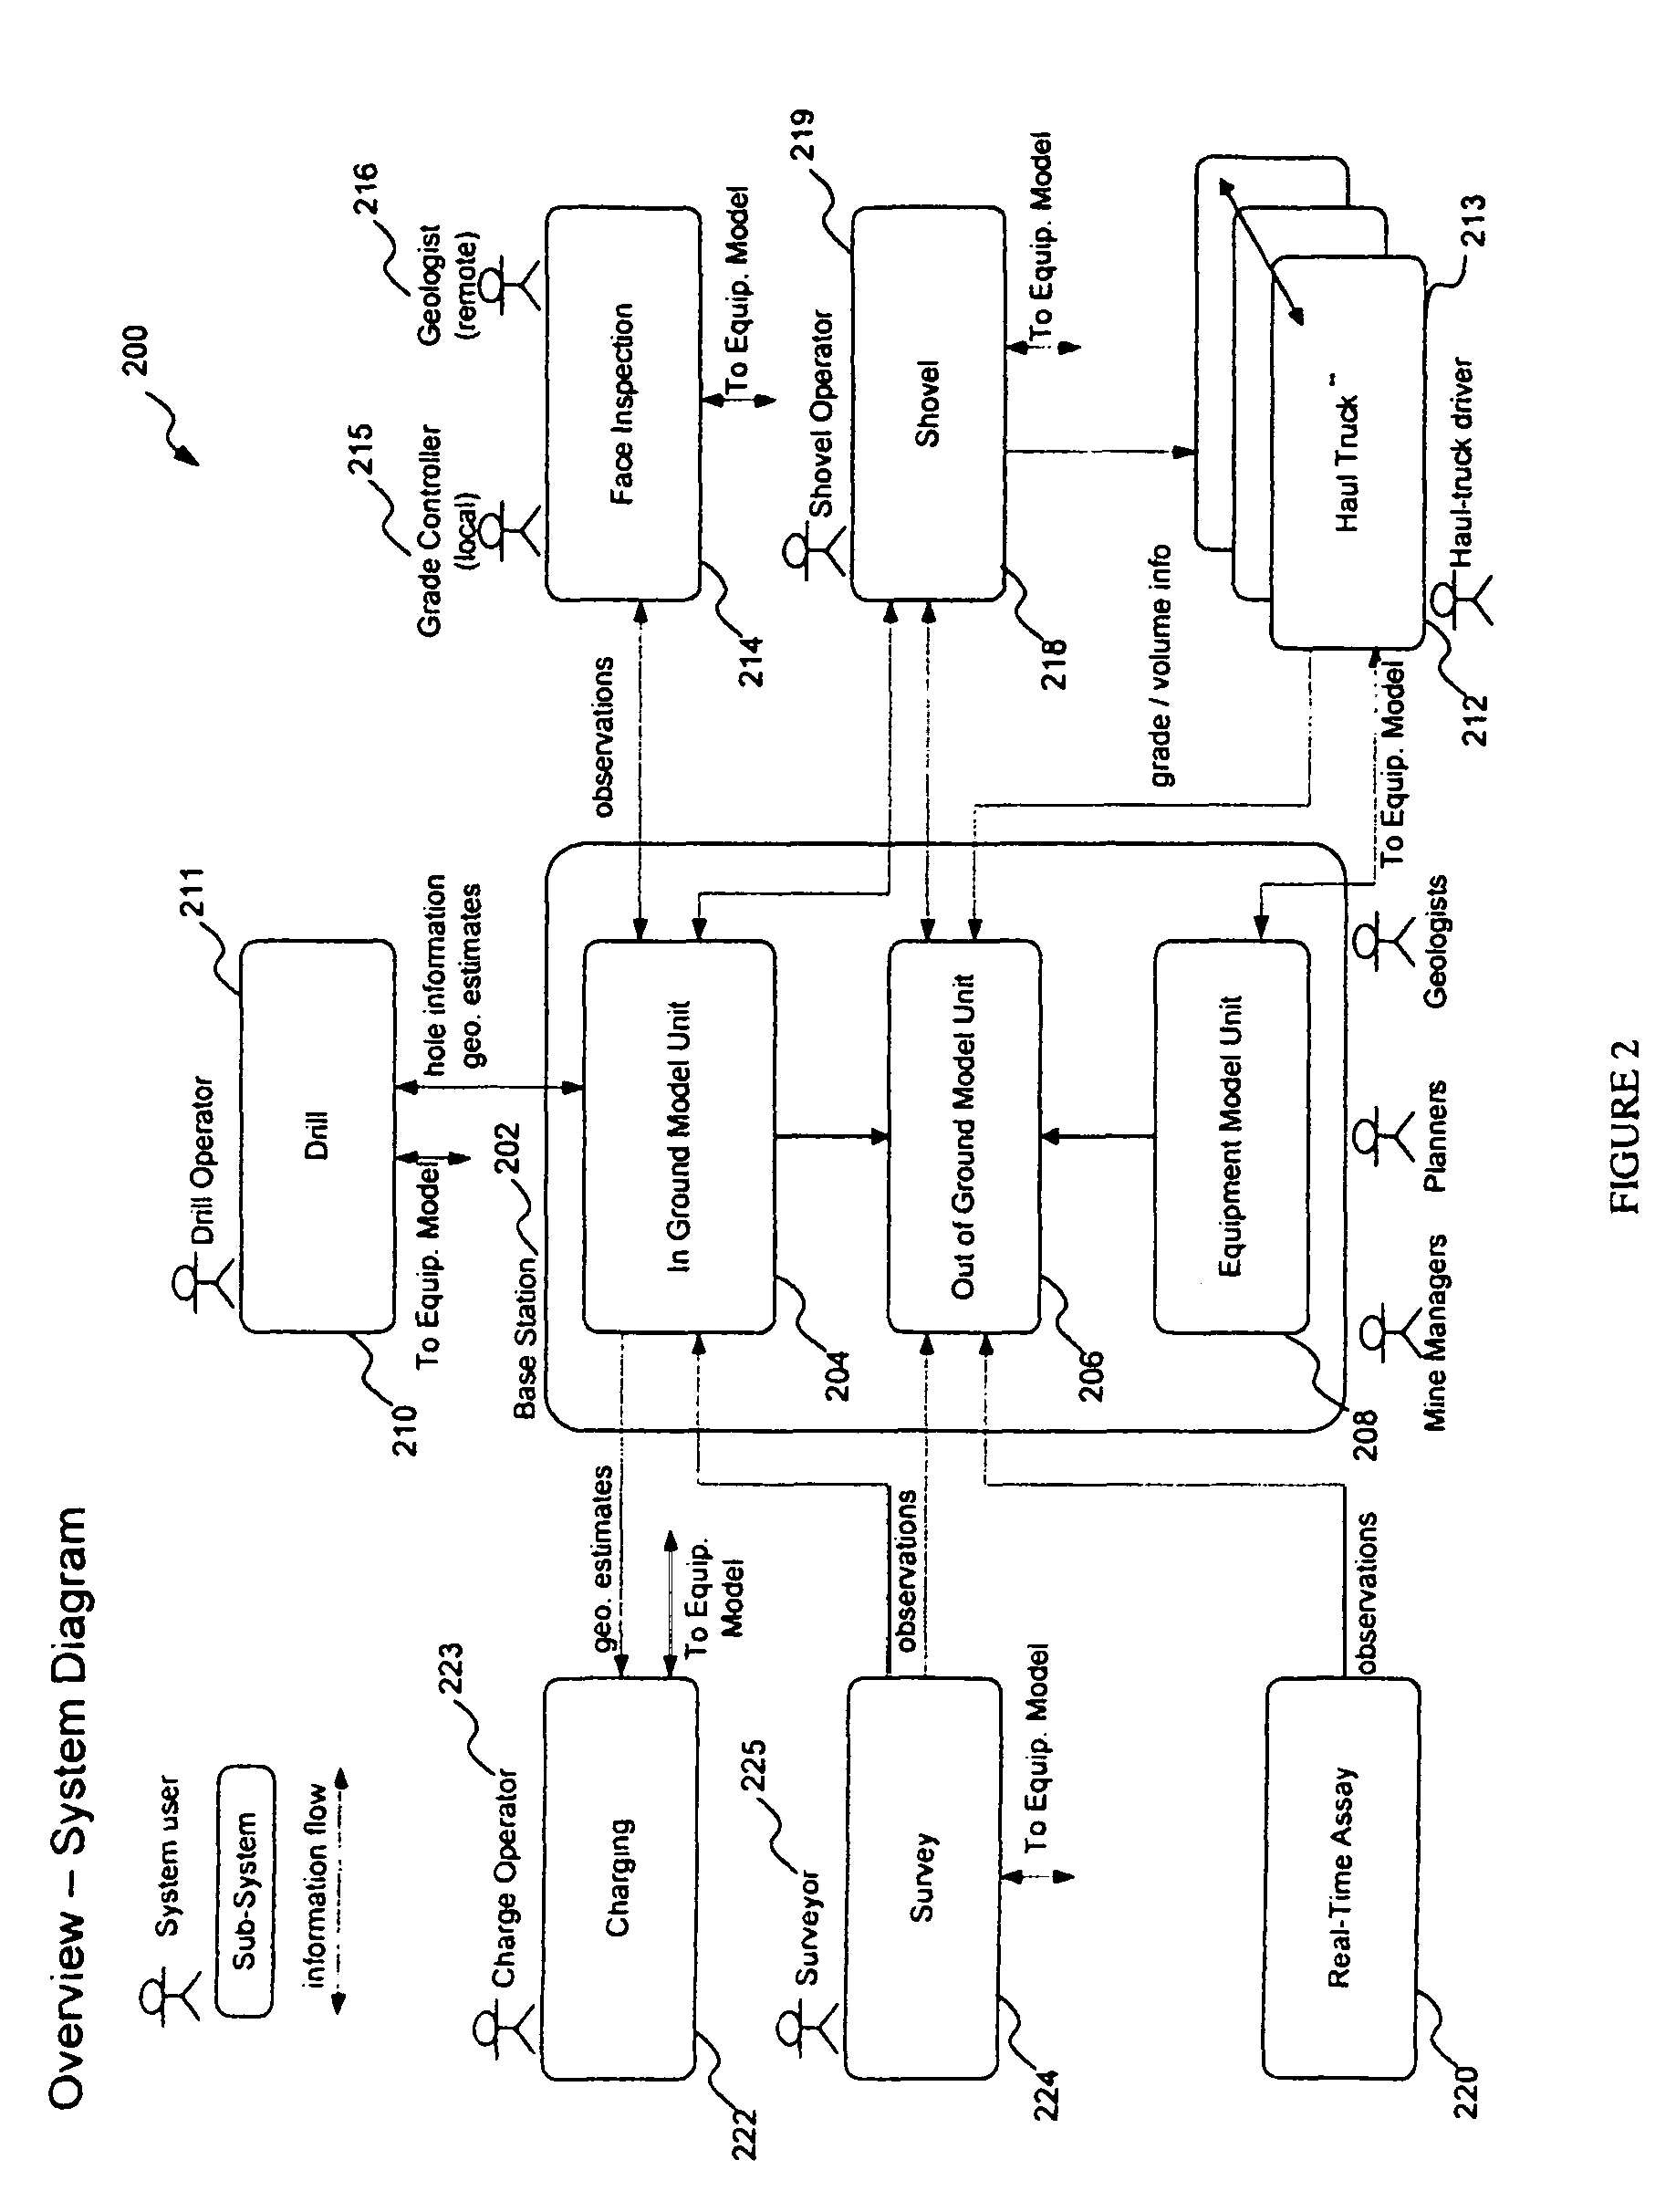 Method and system for exploiting information from heterogeneous sources